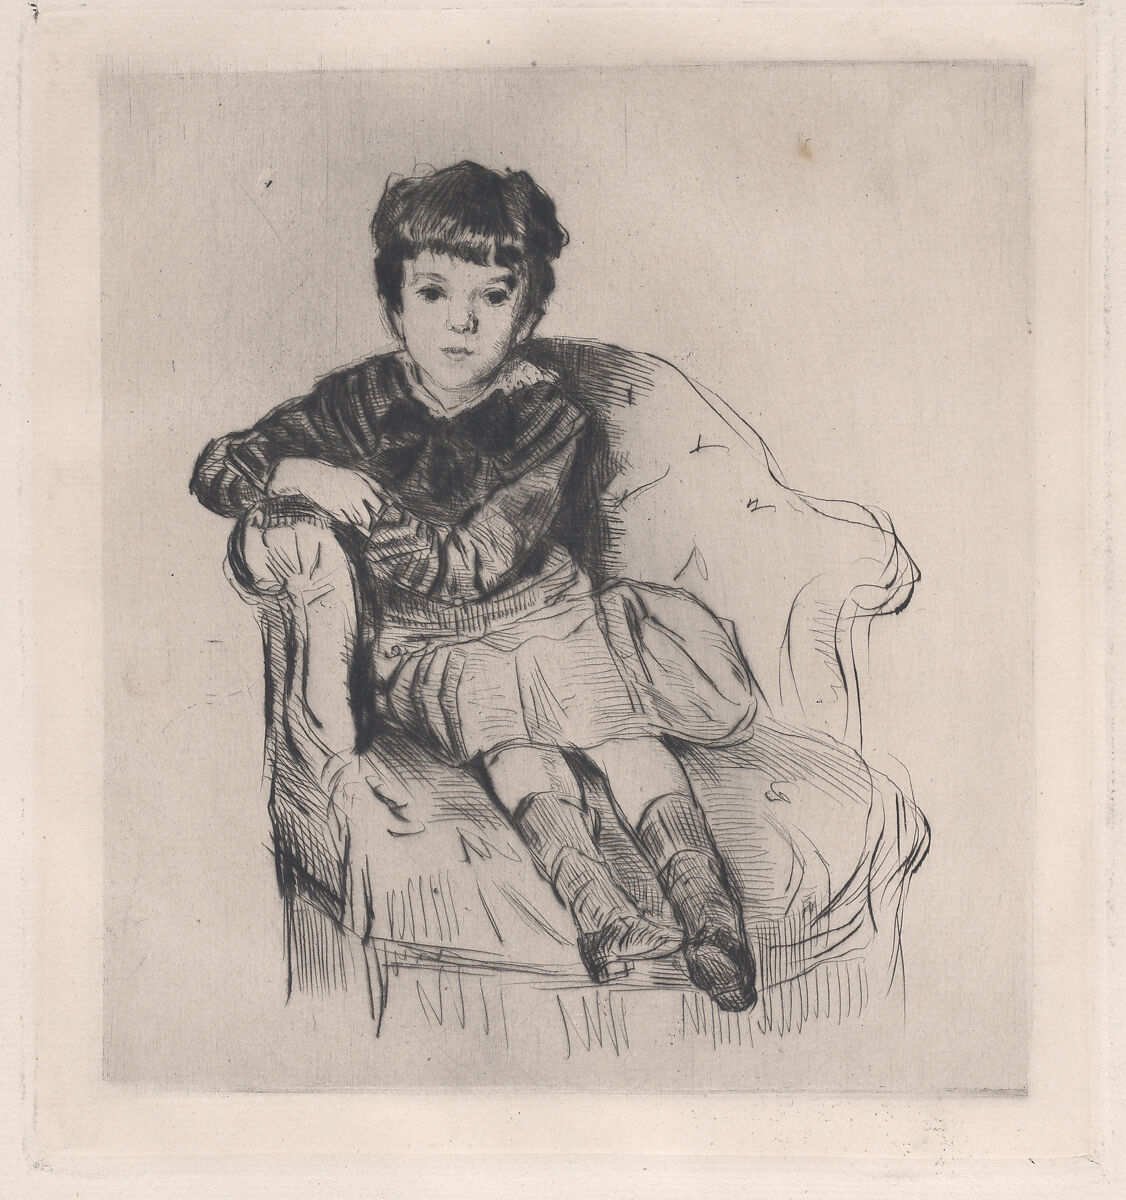 Le fils de Ludovic Halévy, Marcellin Desboutin (French, Cérilly 1823–1902 Nice), Drypoint 